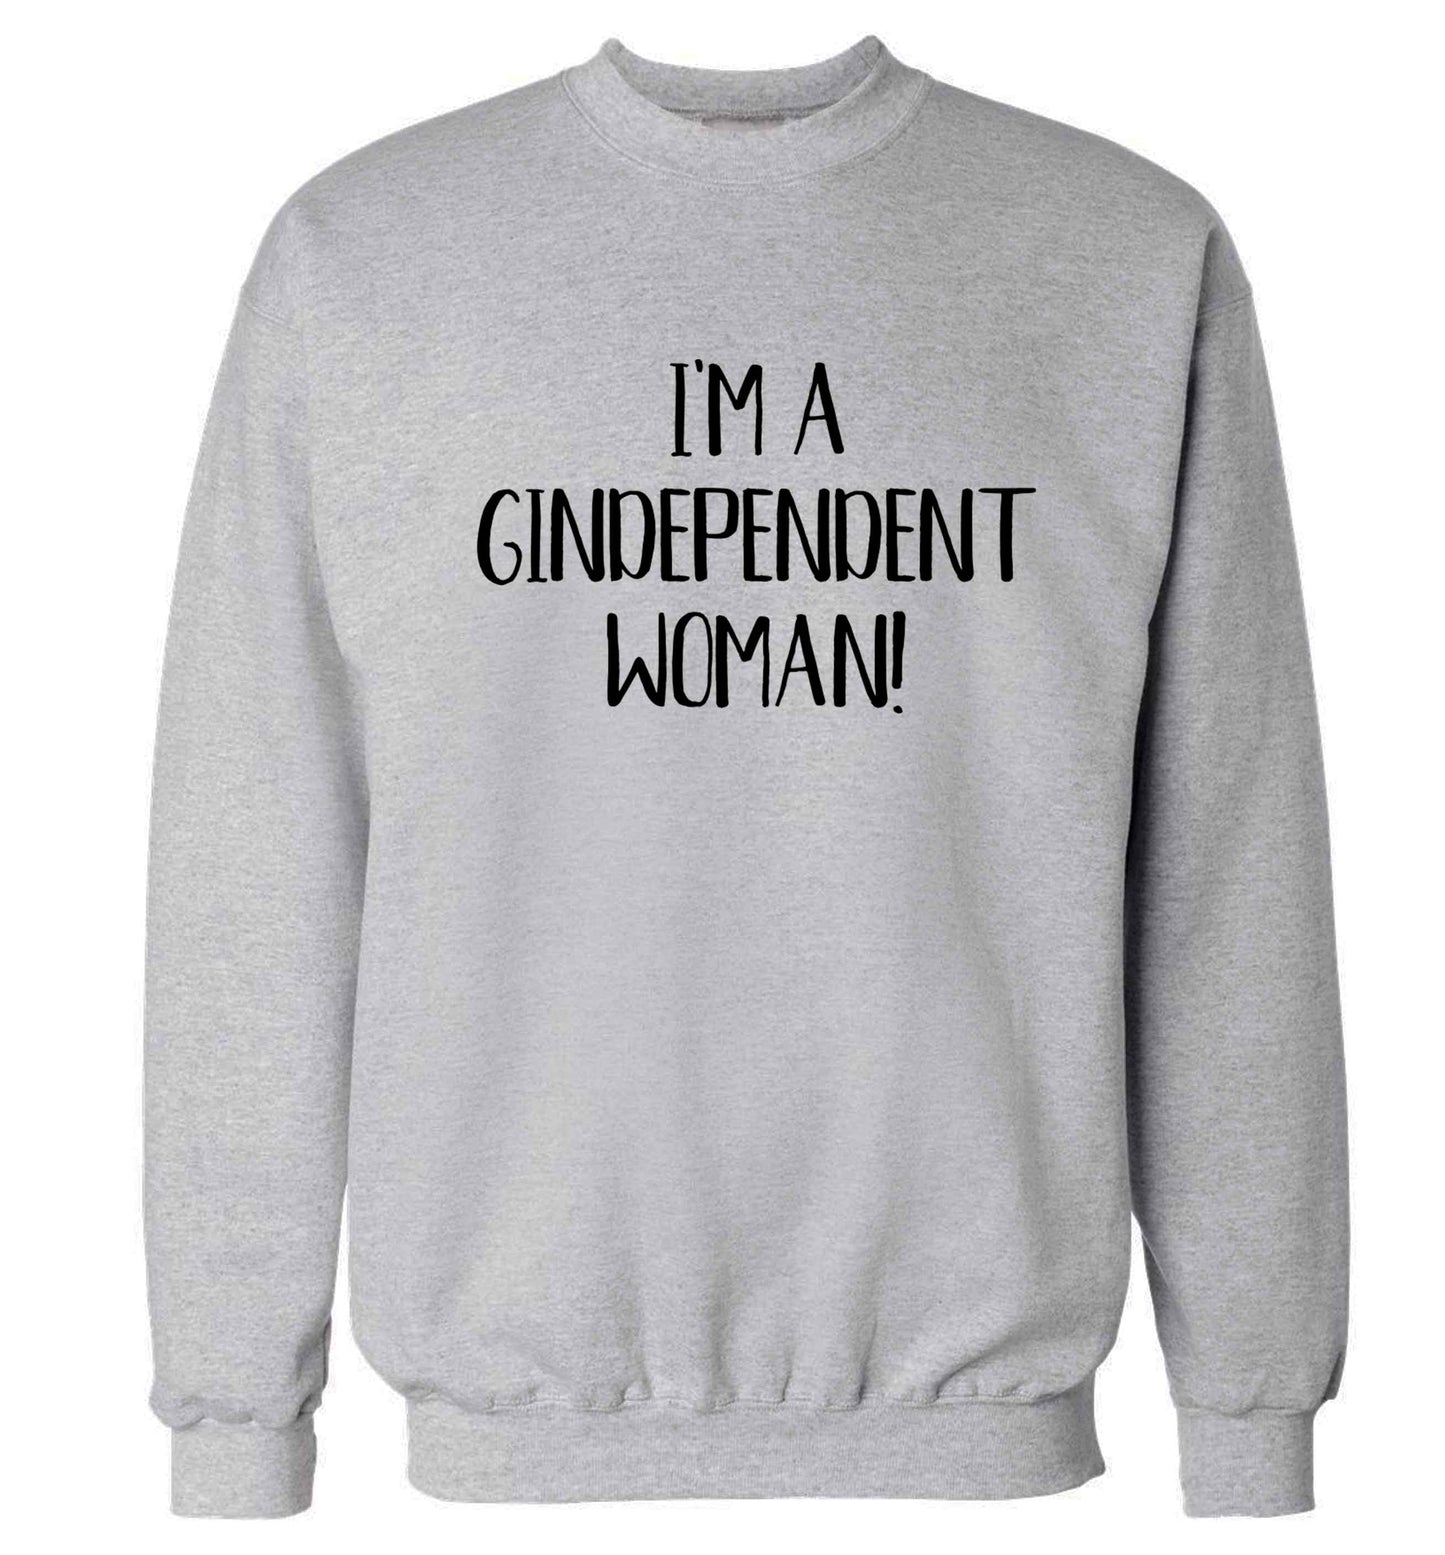 I'm a gindependent woman Adult's unisex grey Sweater 2XL